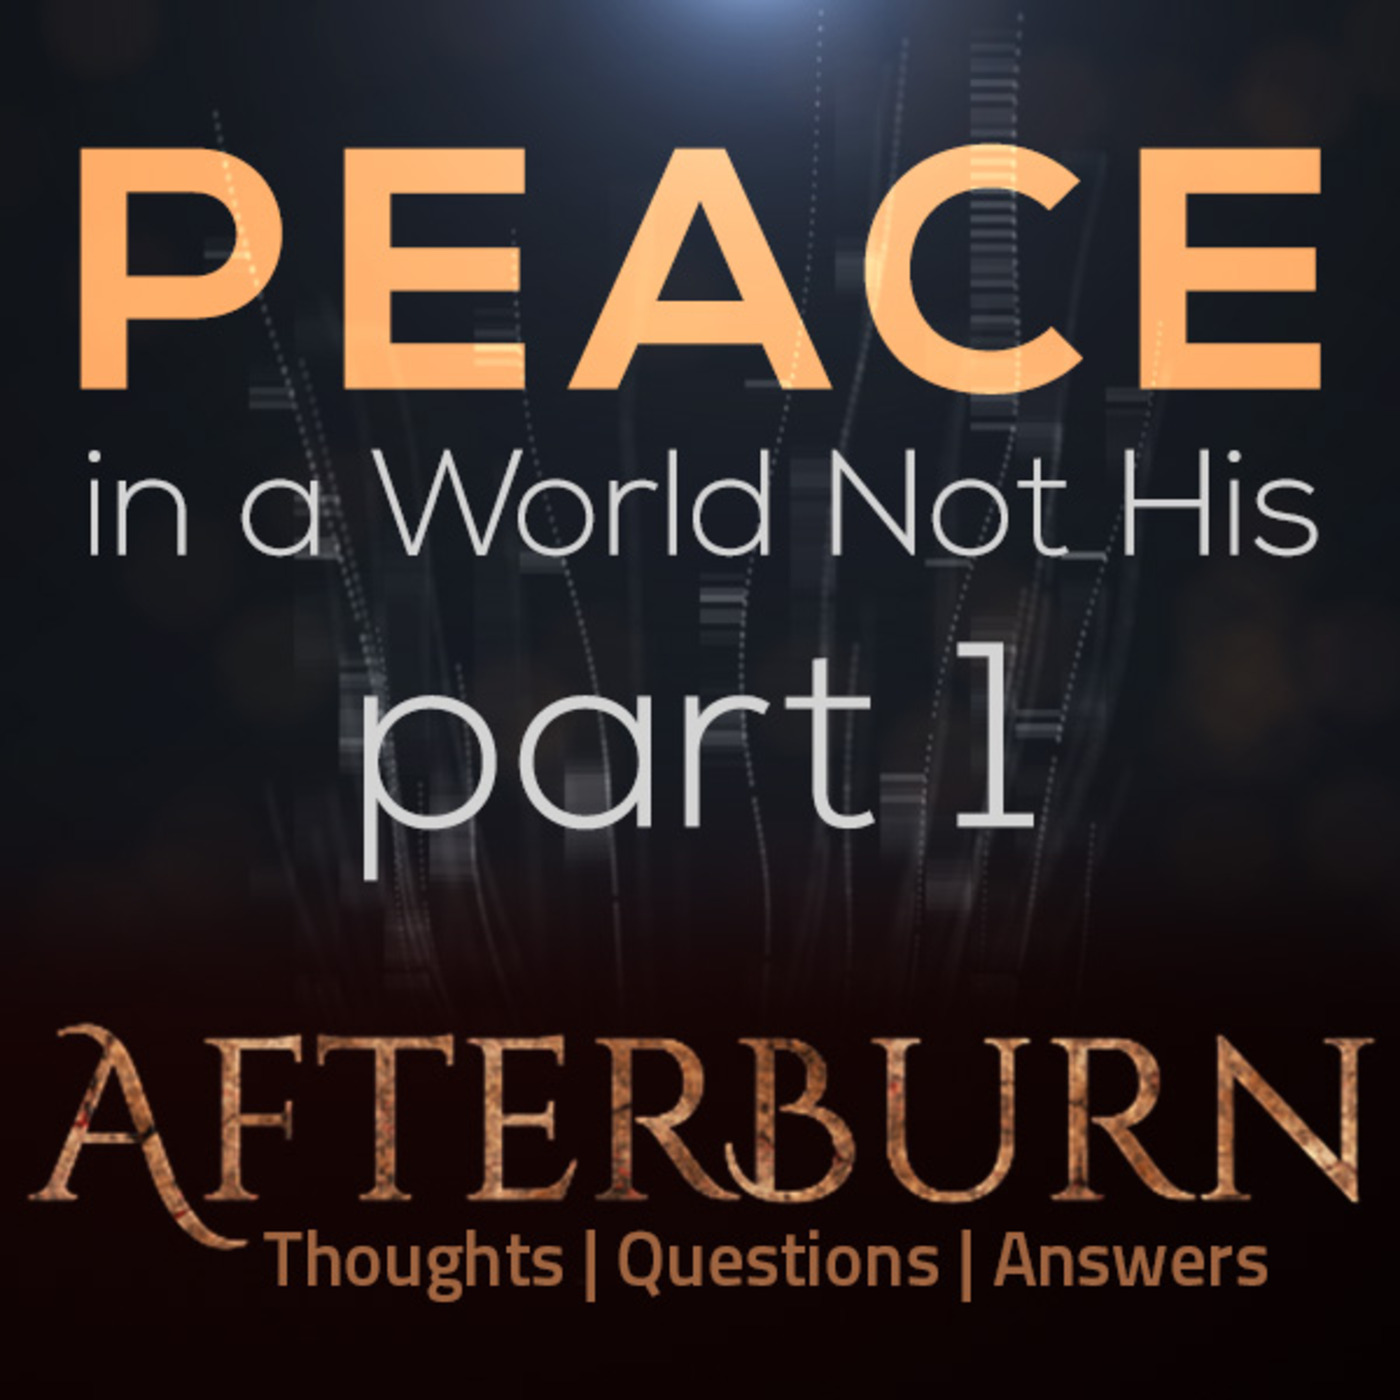 Afterburn: Thoughts, Q&A on Peace in a World Not His - Part 1